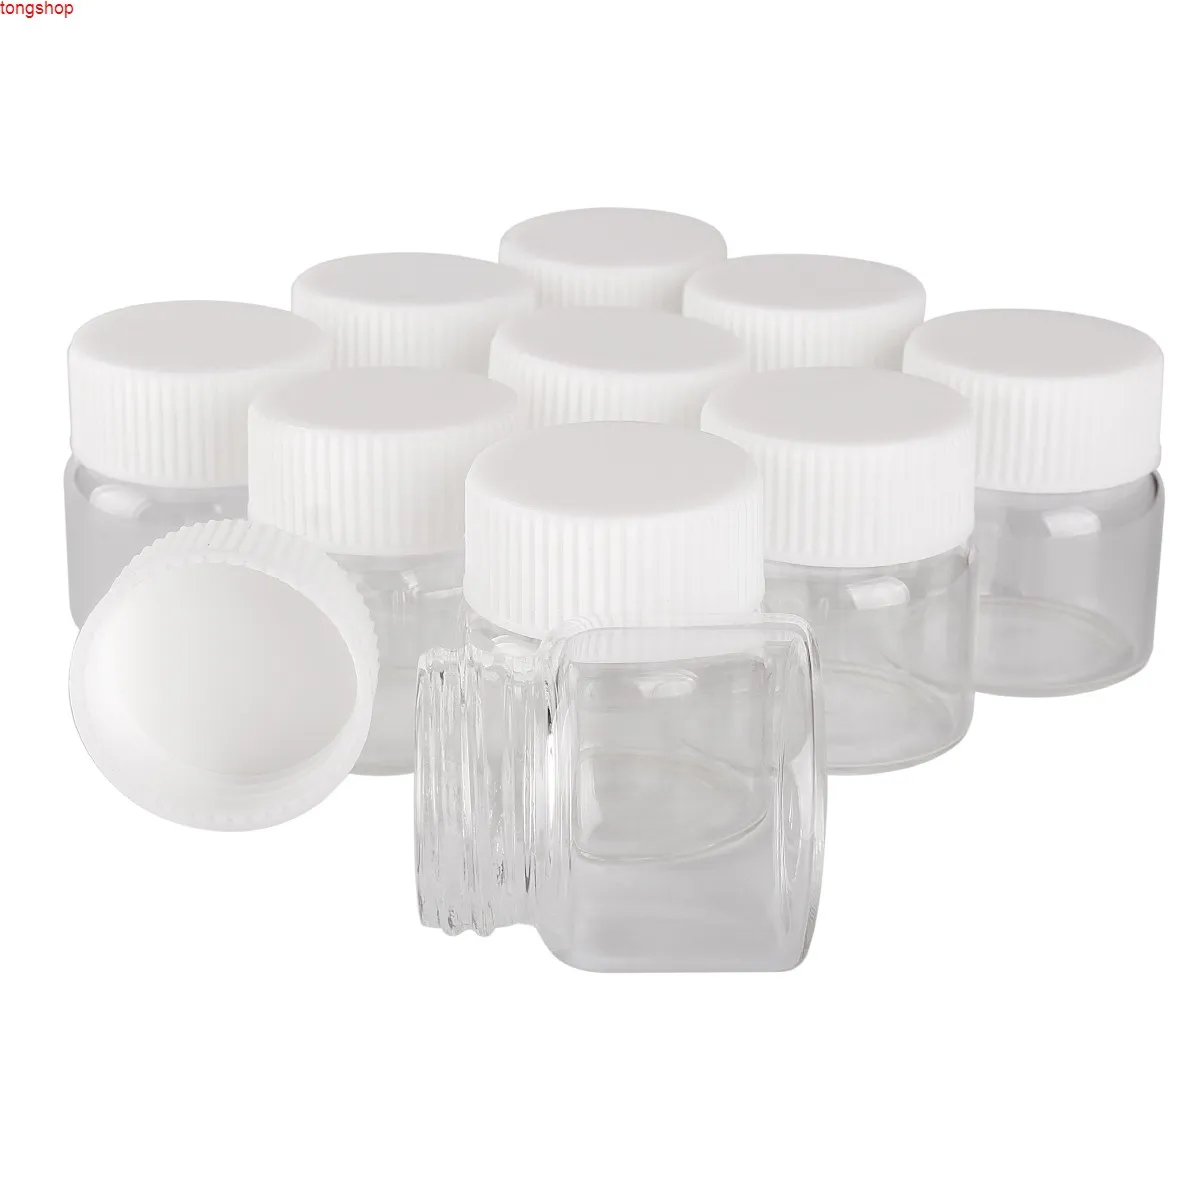 15 pieces 20ml 37*40mm Glass Bottles with White Plastic Caps Spice Container Candy Jars Vials DIY Craft for Wedding Giftgoods